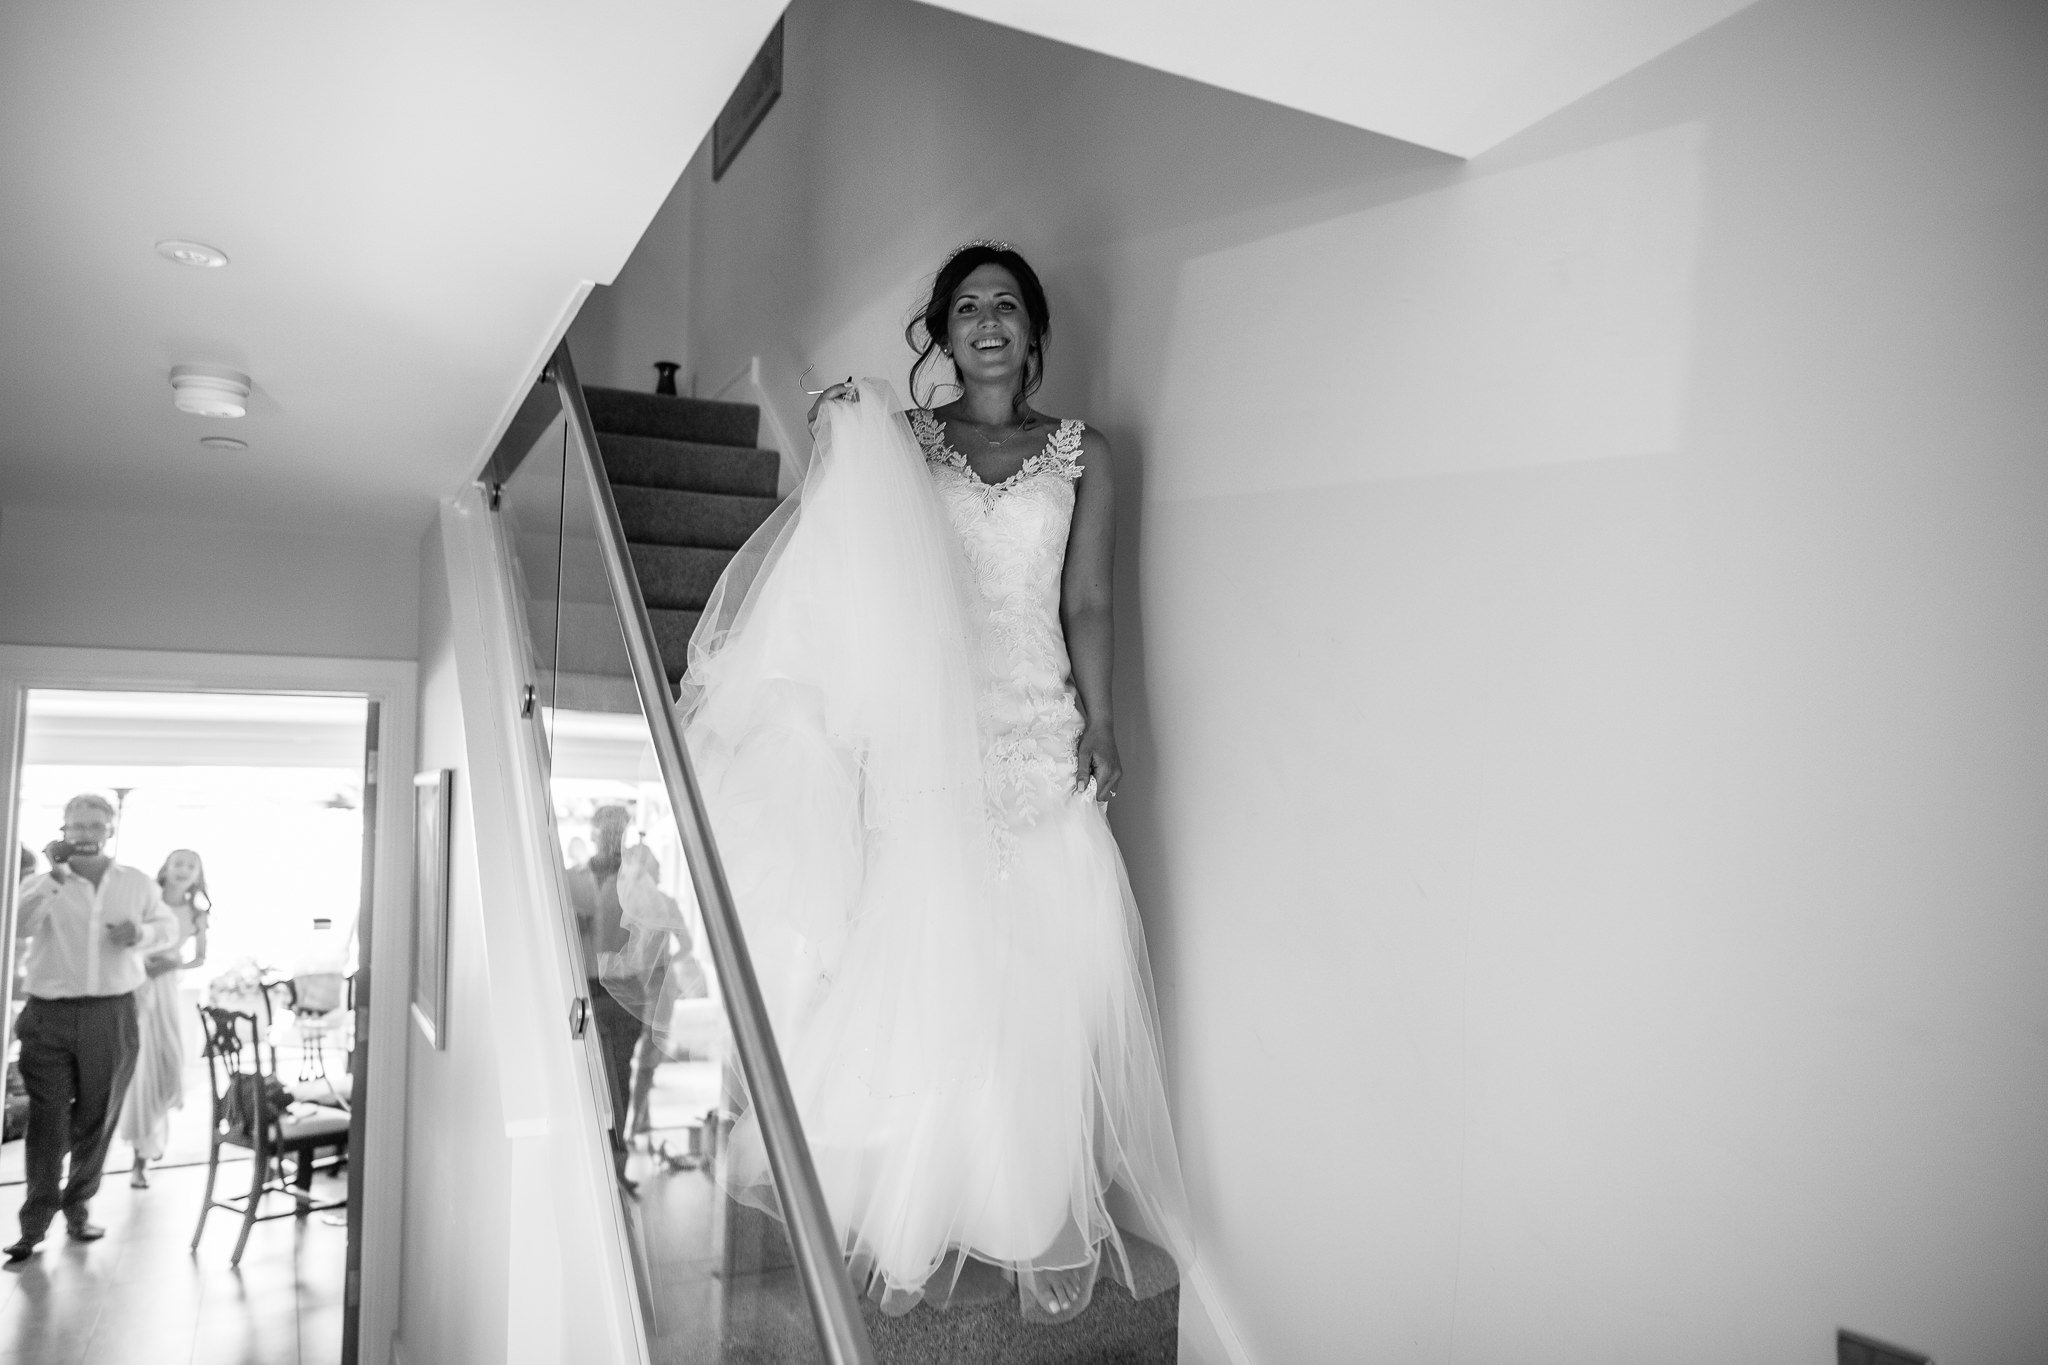  Bride coming downstairs with a big smile on her face. 